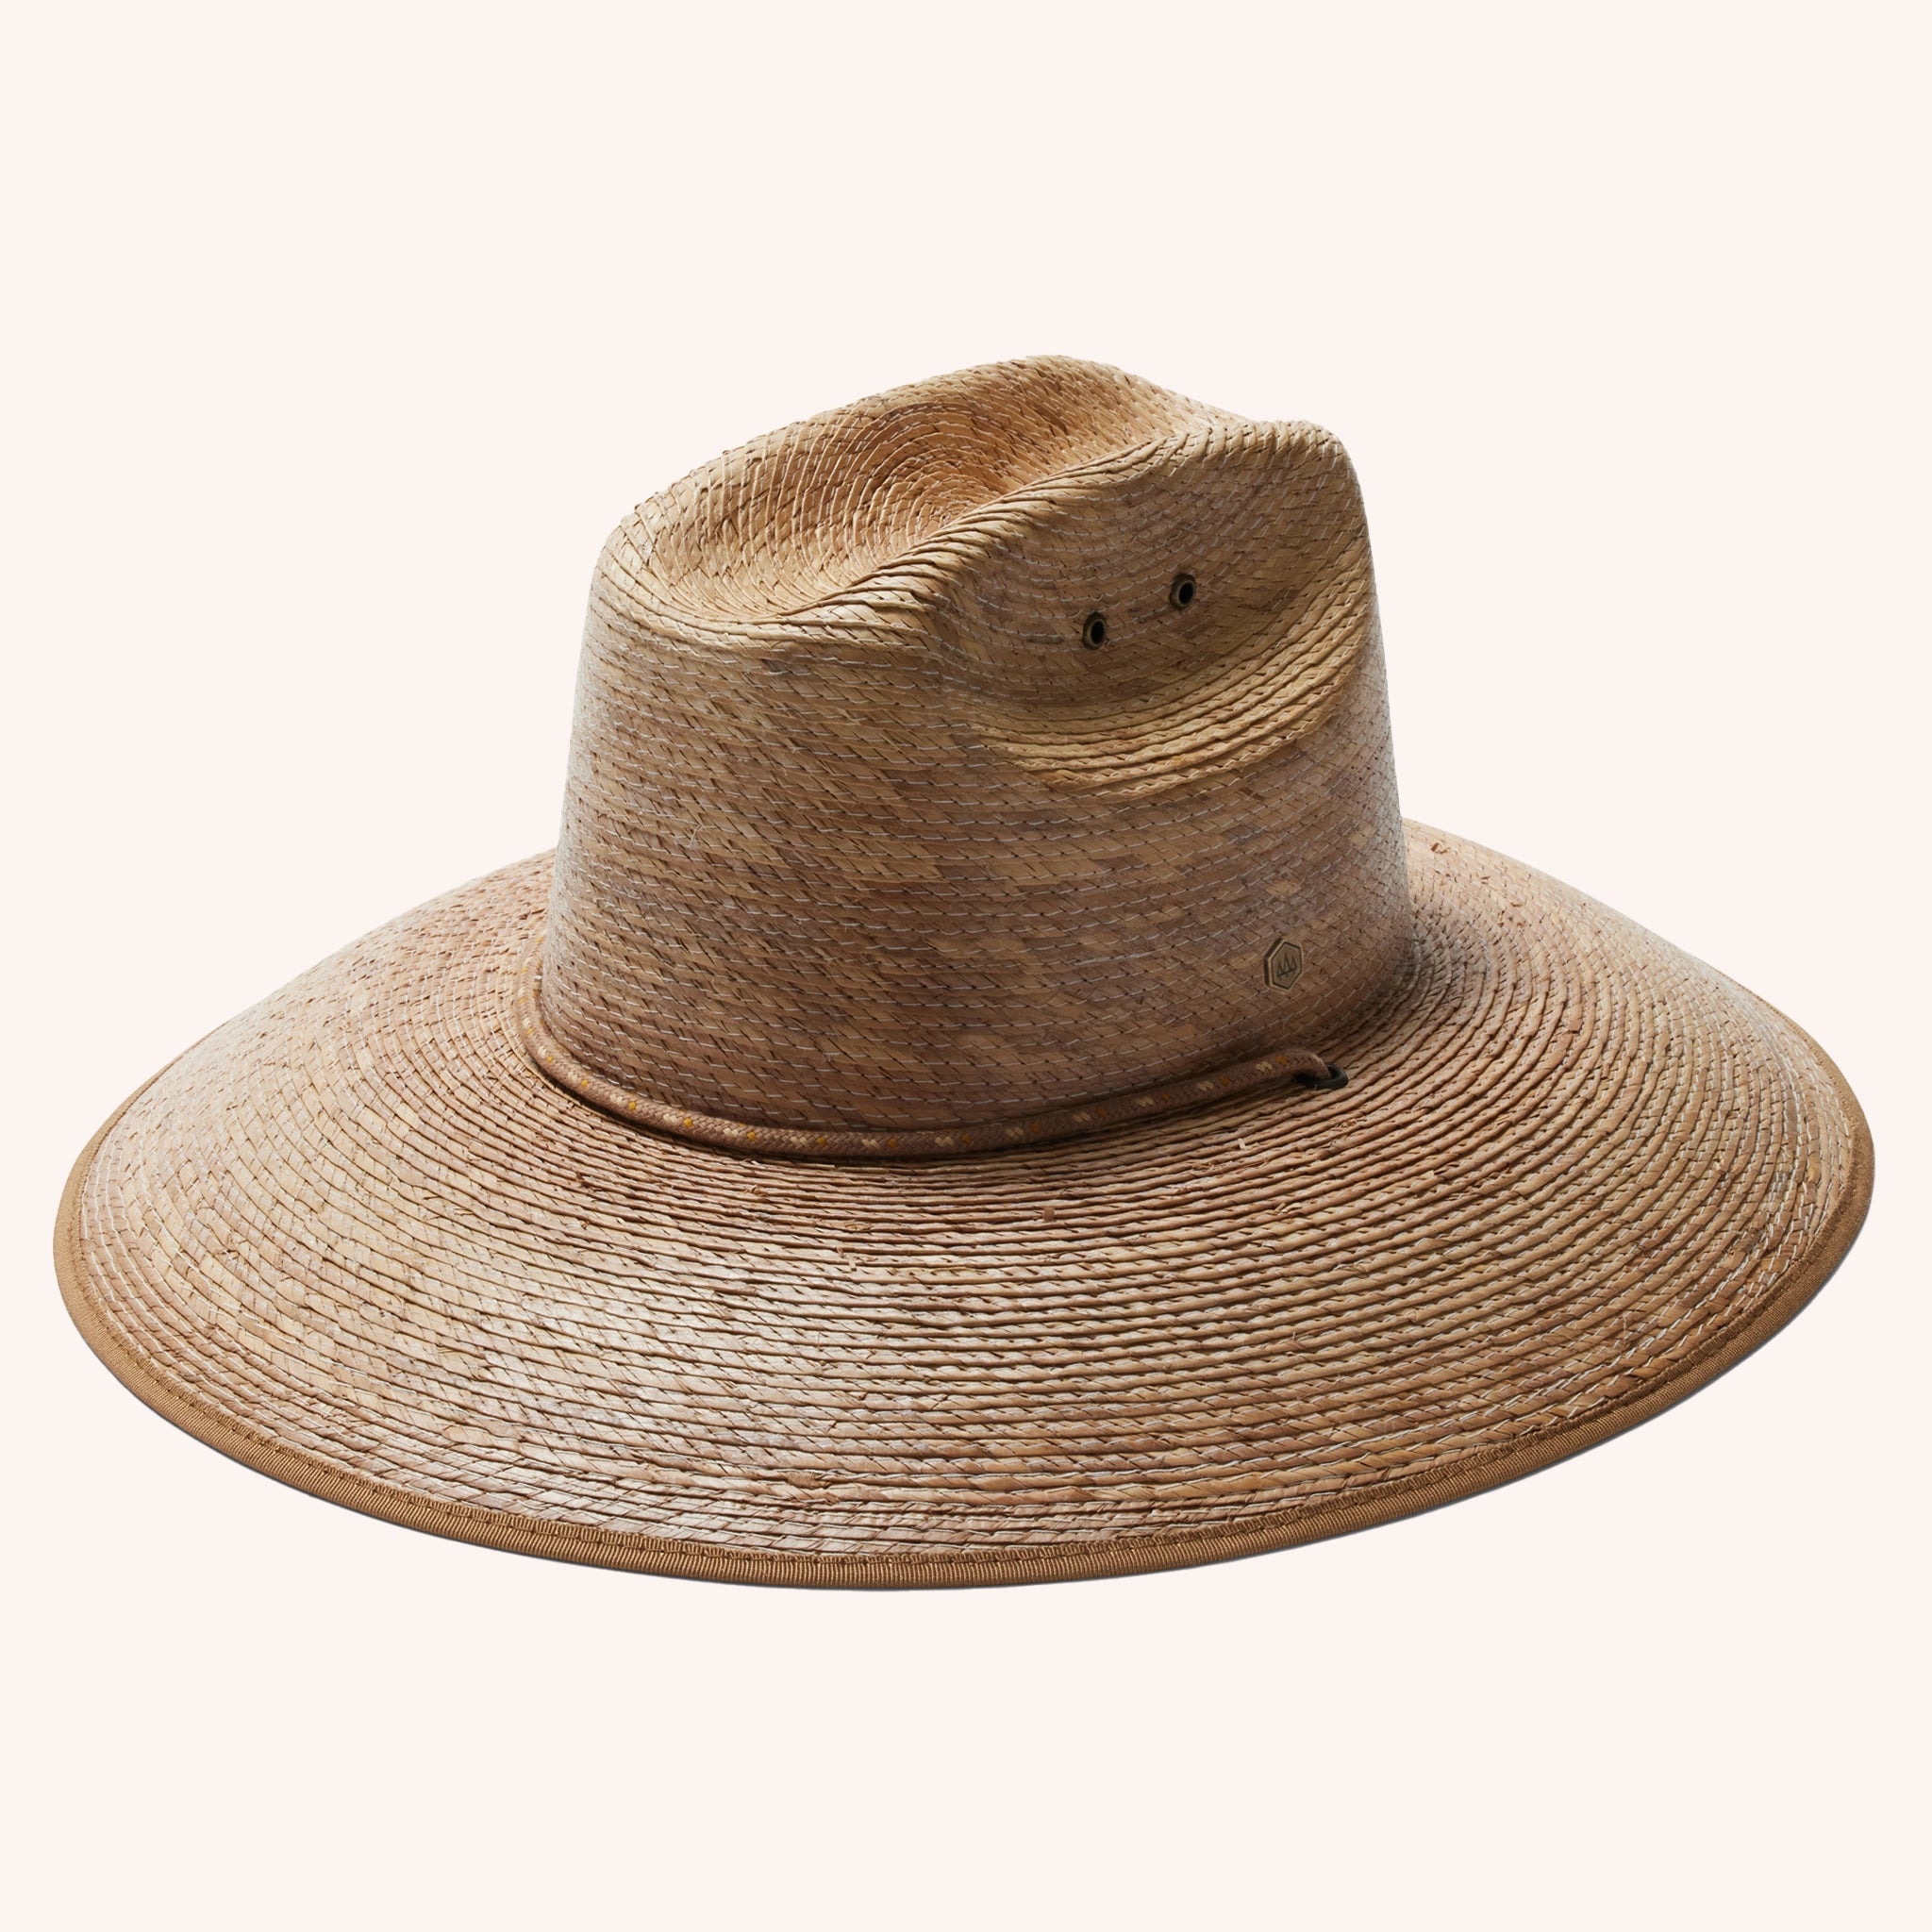 A darker brown straw sun hat with a wide curved brim and a drawstring.